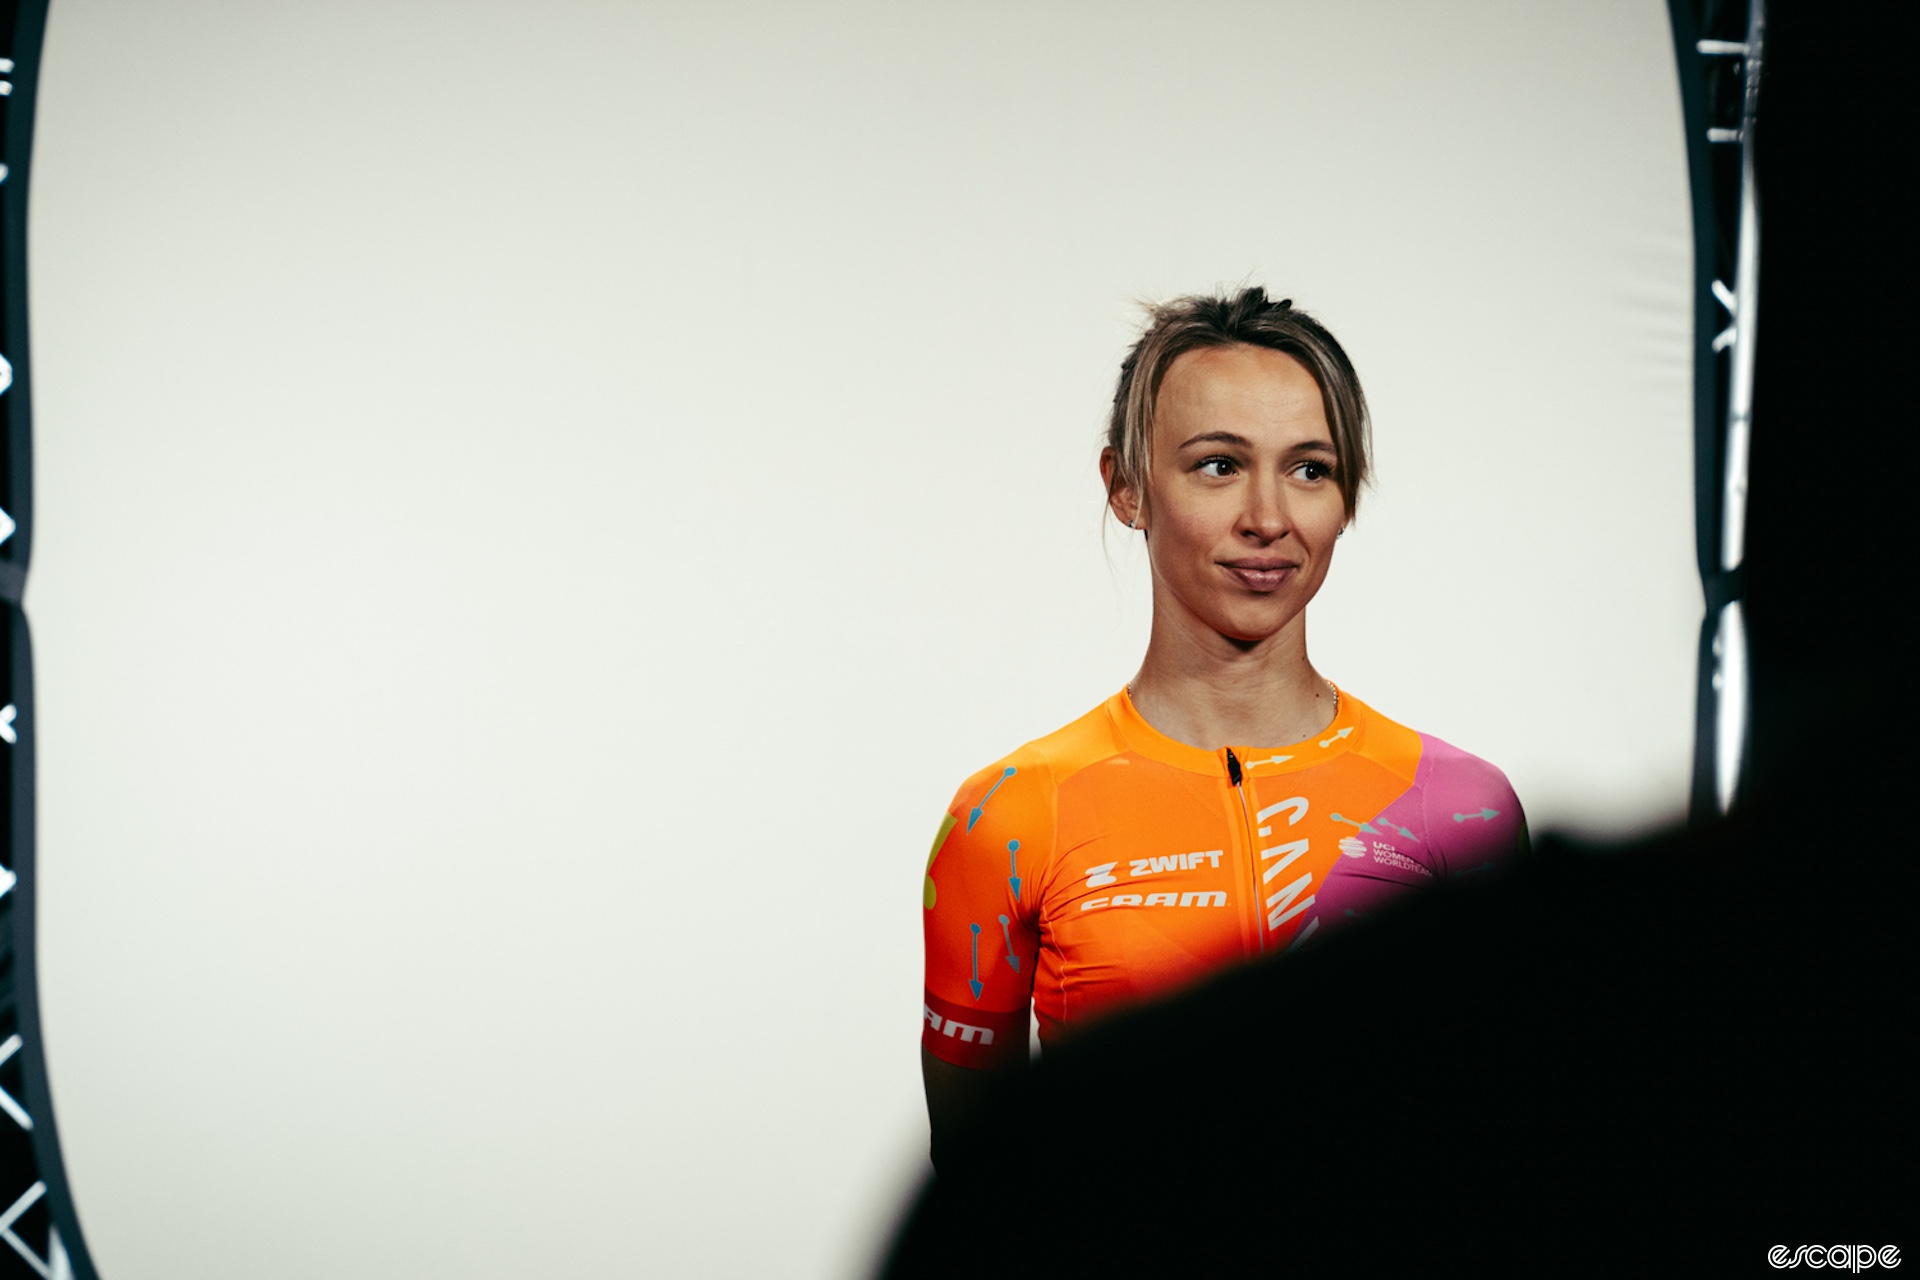 Kasia Niewiadoma poses for a team picture before the 2023 Tour de France Femmes. She's against a white seamless backdrop, and her gaze is off to her left, with a quiet, contemplative expression and a slight smile.